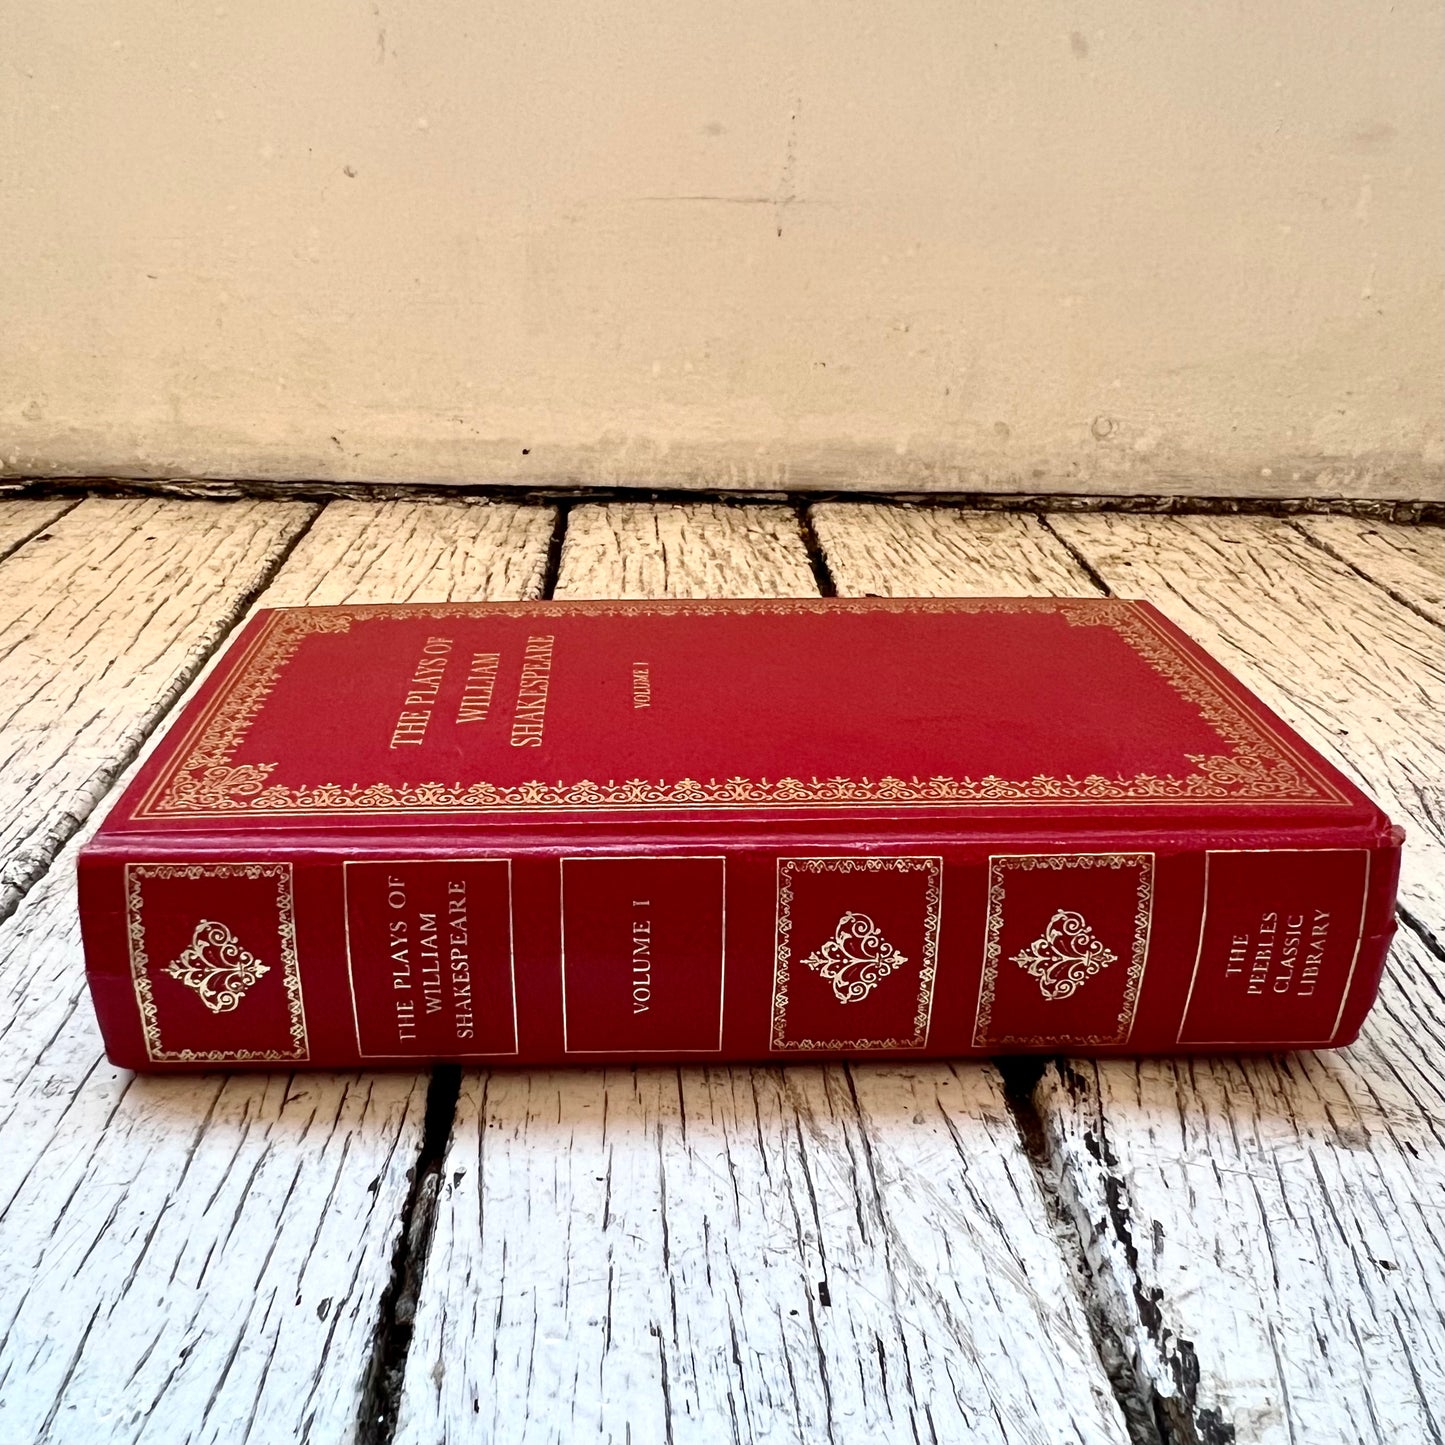 Vintage Pebble Library Red Leather and Gilt Volume I of Shakespeare's Plays, Hardcover Book, 1985